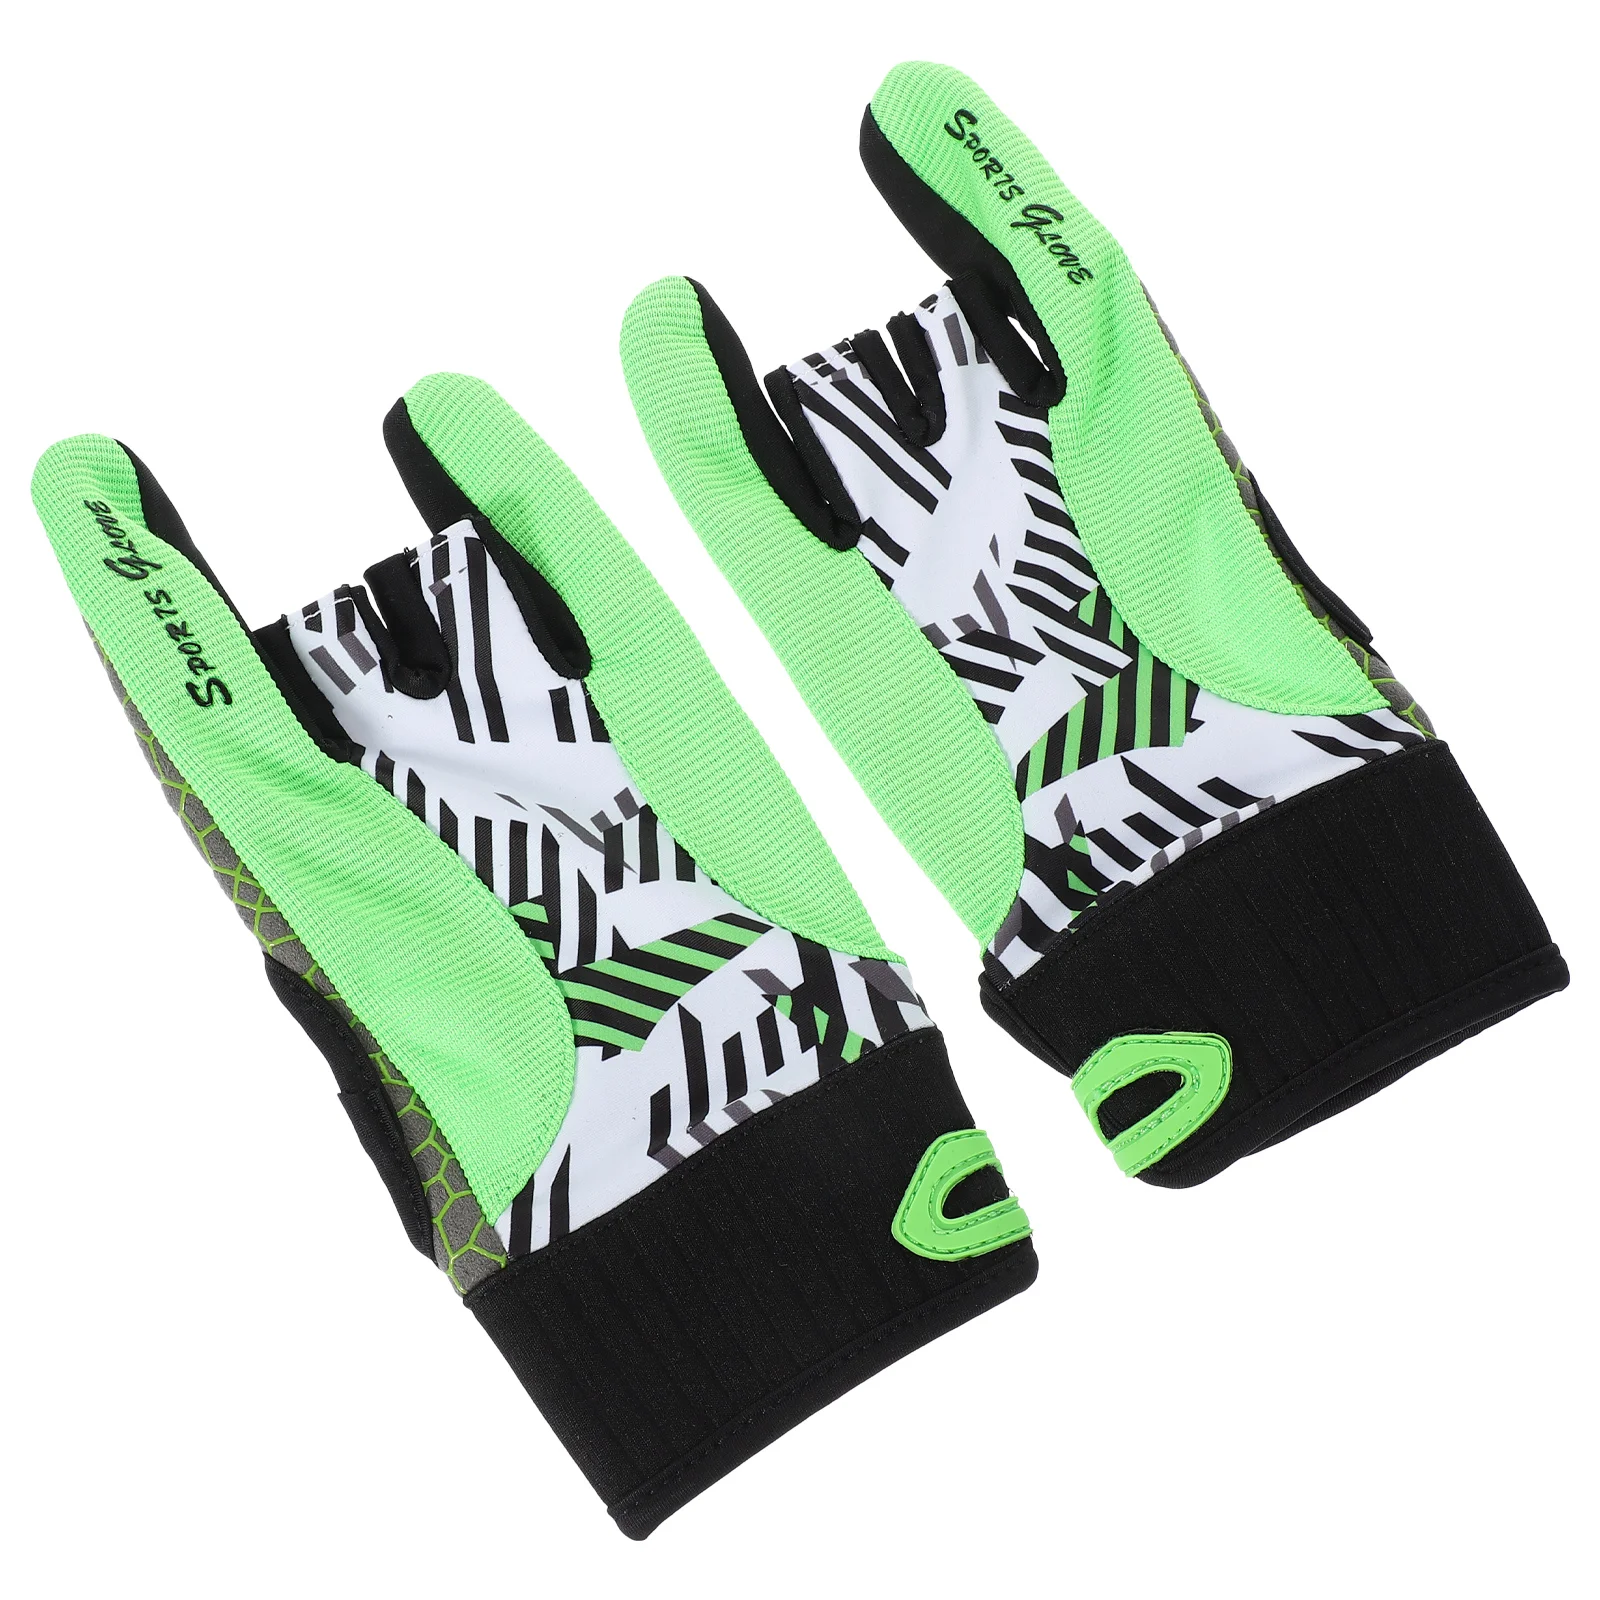 of Silicone Bowling Gloves Professional Anti-slip Elastic Breathable Sports Gloves